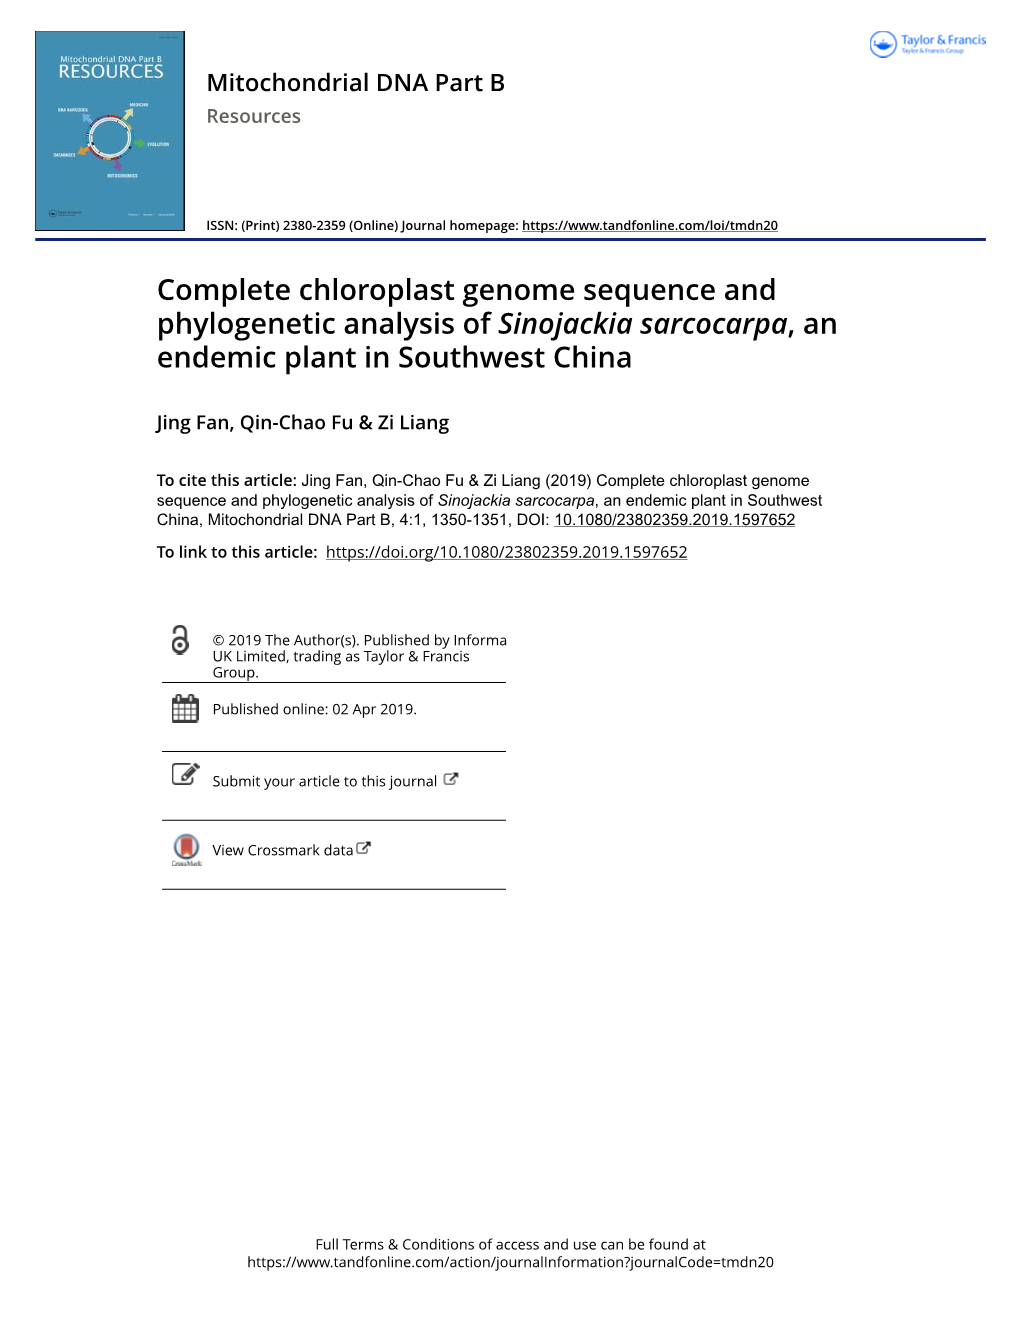 Complete Chloroplast Genome Sequence and Phylogenetic Analysis of Sinojackia Sarcocarpa, an Endemic Plant in Southwest China